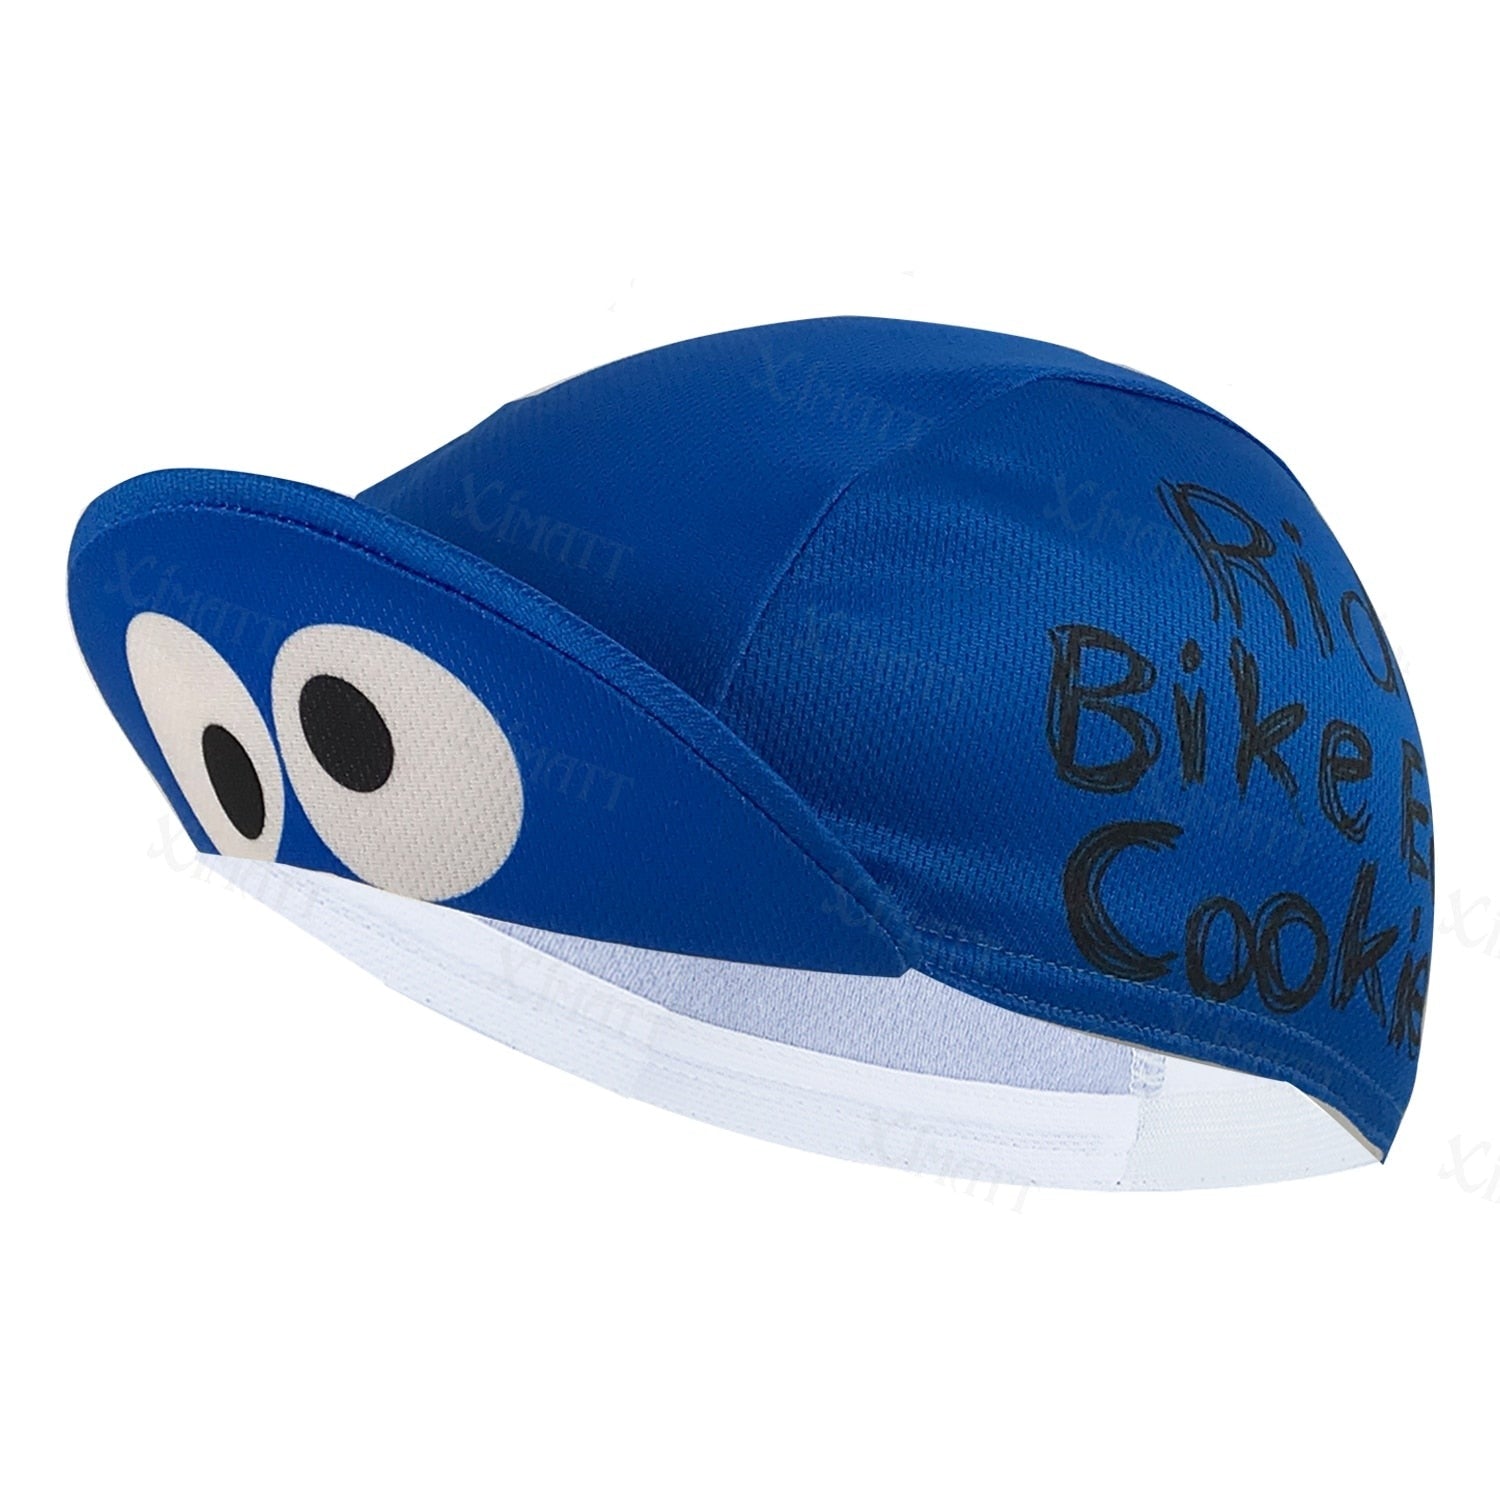 Classic Ride Bike Eat Cookie Big Eyes Polyester Cycling Caps Quick Dry Breathable Bicycle Sports  Men's Hat